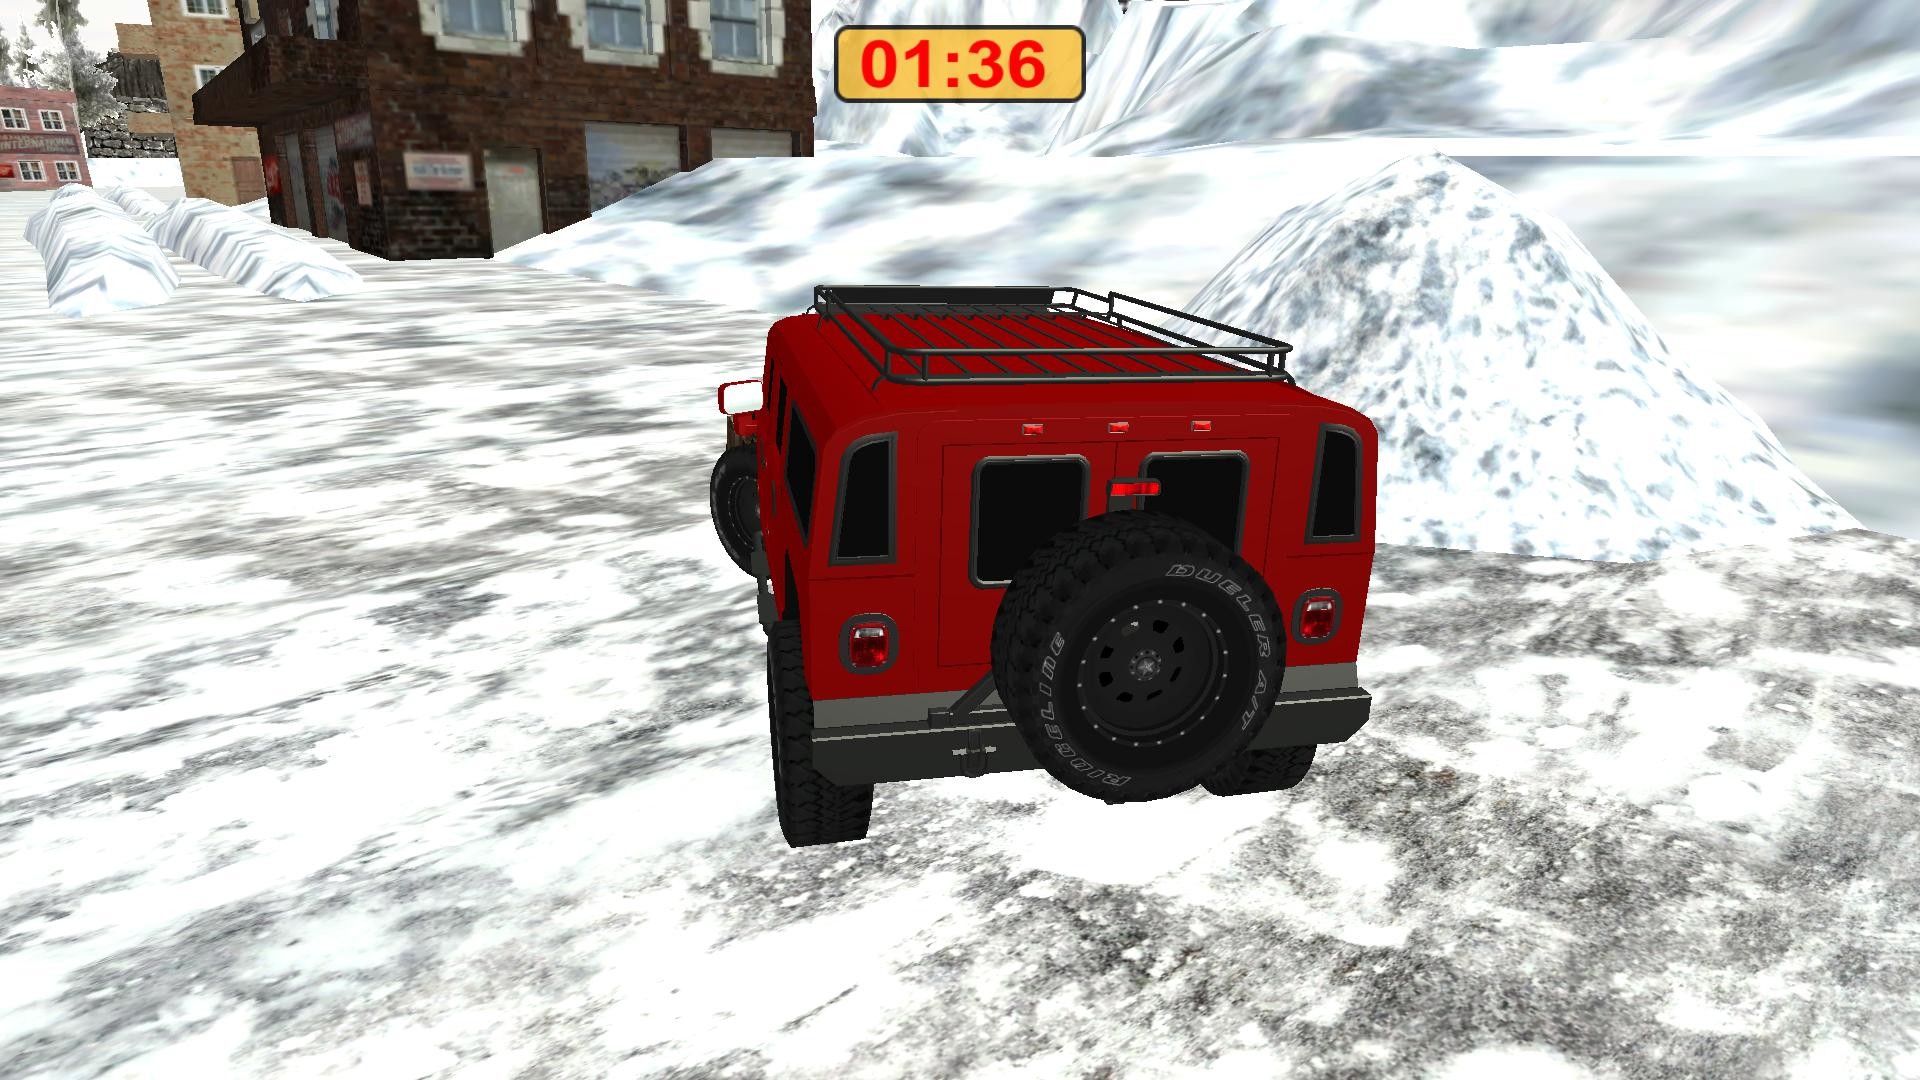 Snow Clearing Driving Simulator Steam CD Key 5.12$